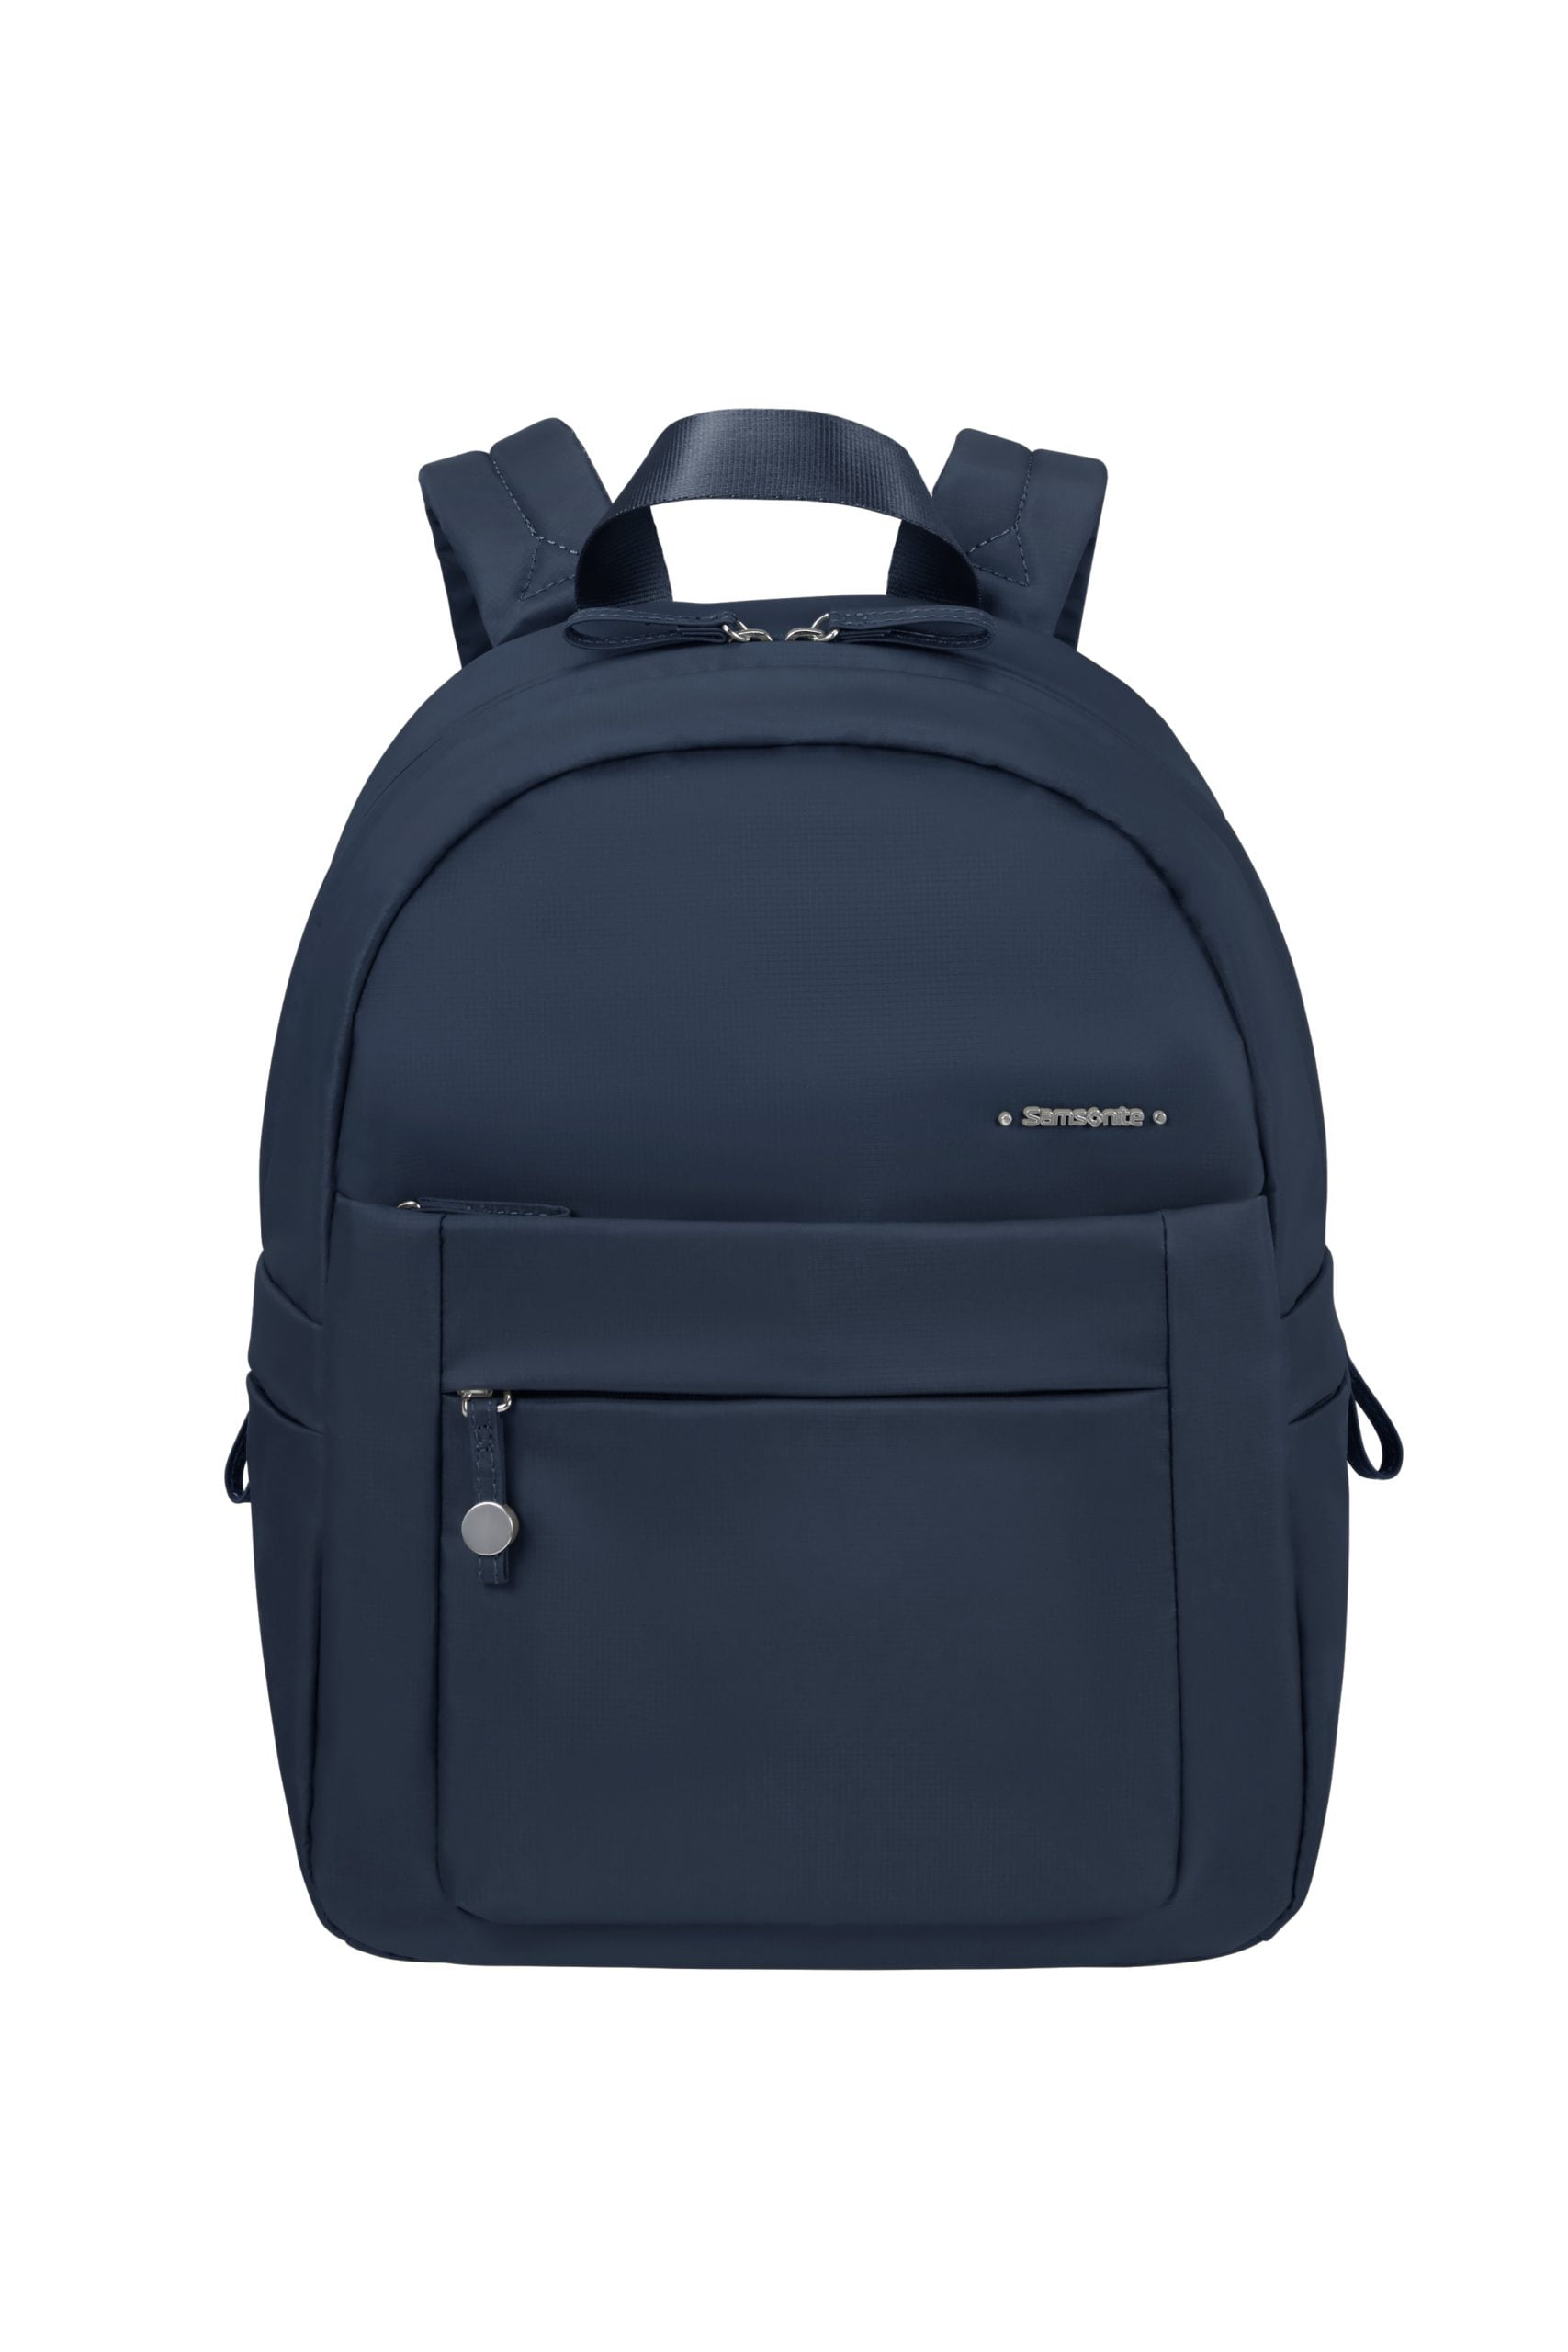 https://www.temprado.com/wp-content/uploads/2023/03/144723_1247_MOVE_4.0_BACKPACK_FRONT-scaled.jpg